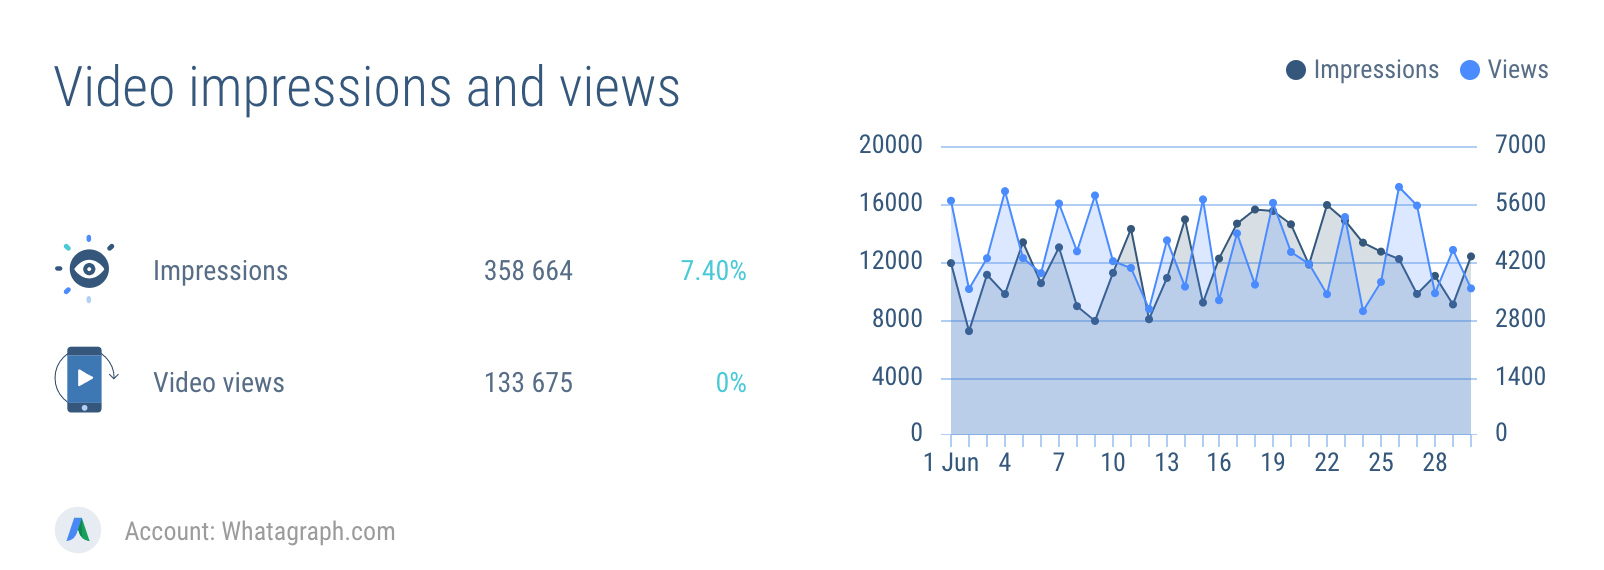 AdWords video impressions and views